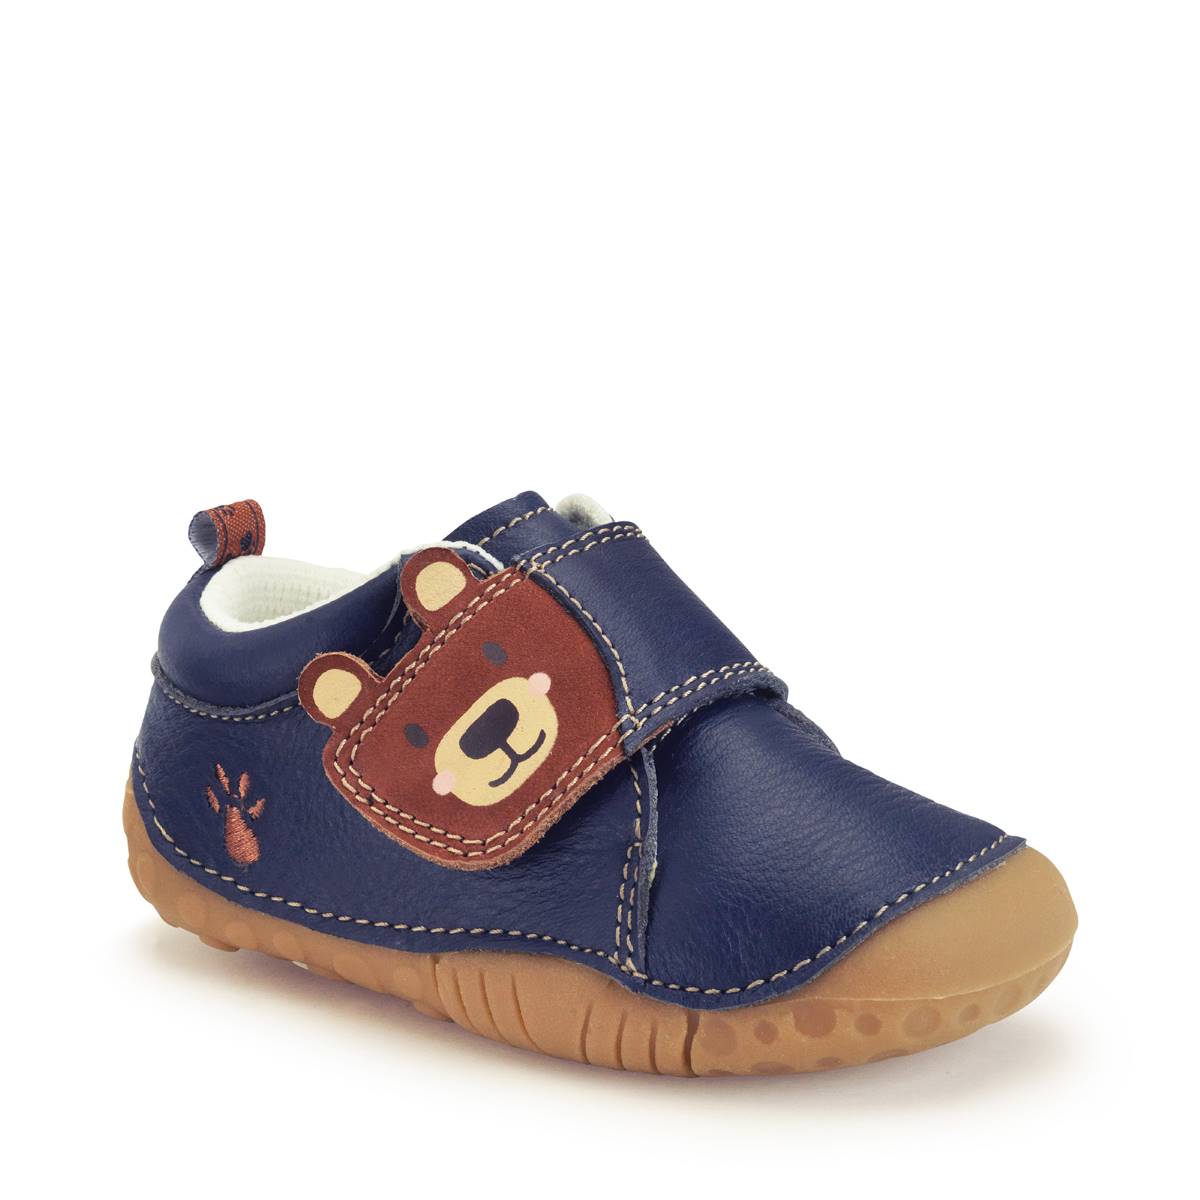 Start Rite Bear Hug 1v BLUE LEATHER Kids Boys First Shoes 0824-97G in a Plain Leather in Size 4